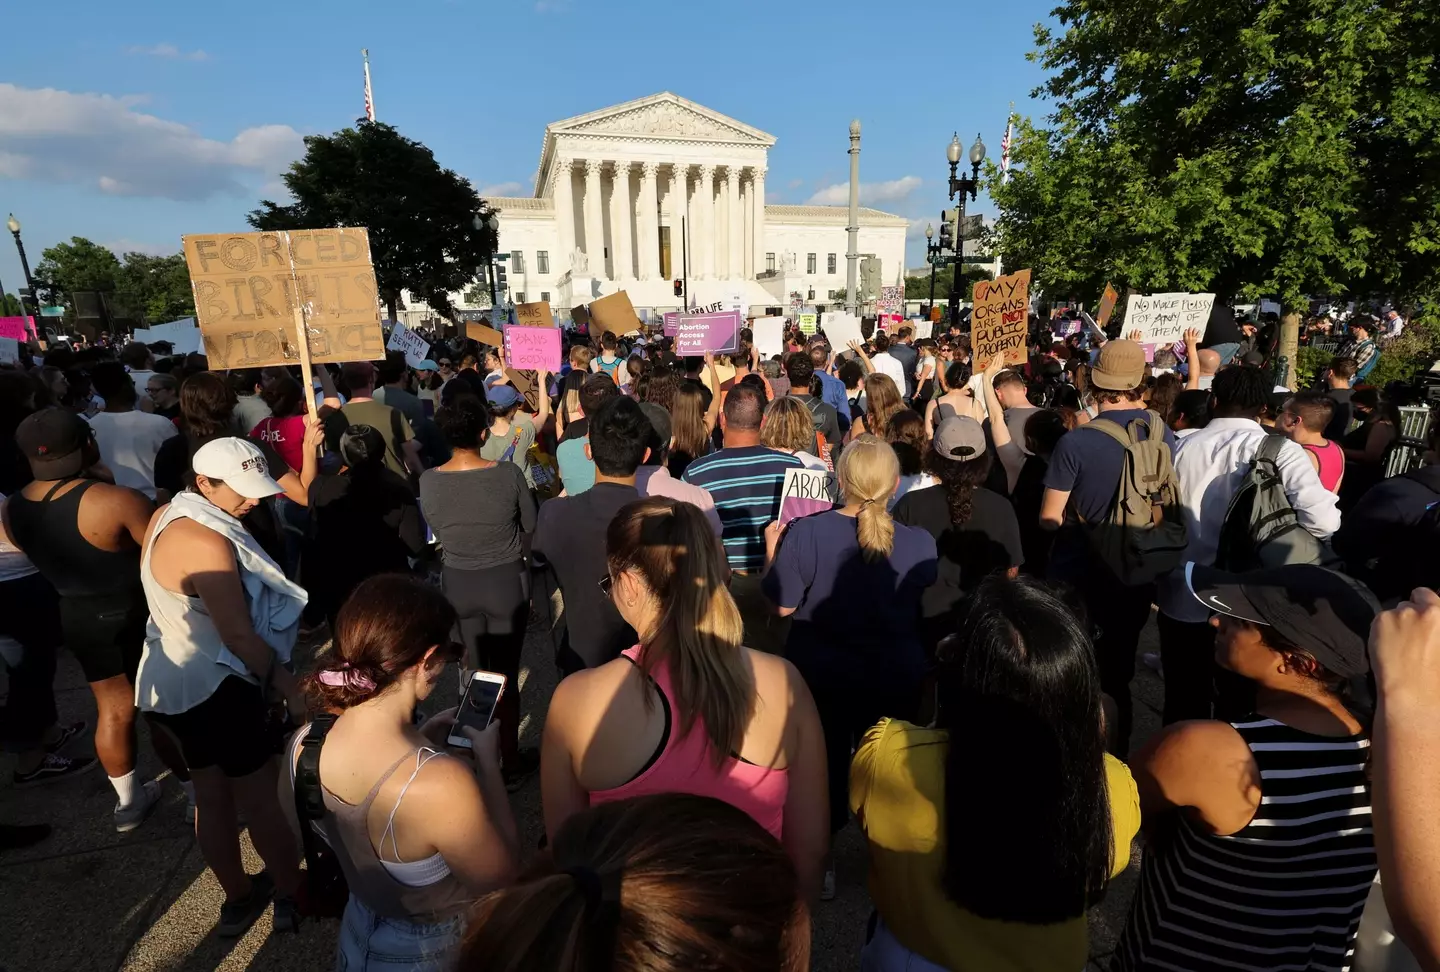 The Supreme Court decision to overturn Roe v Wade has been met with significant protests.